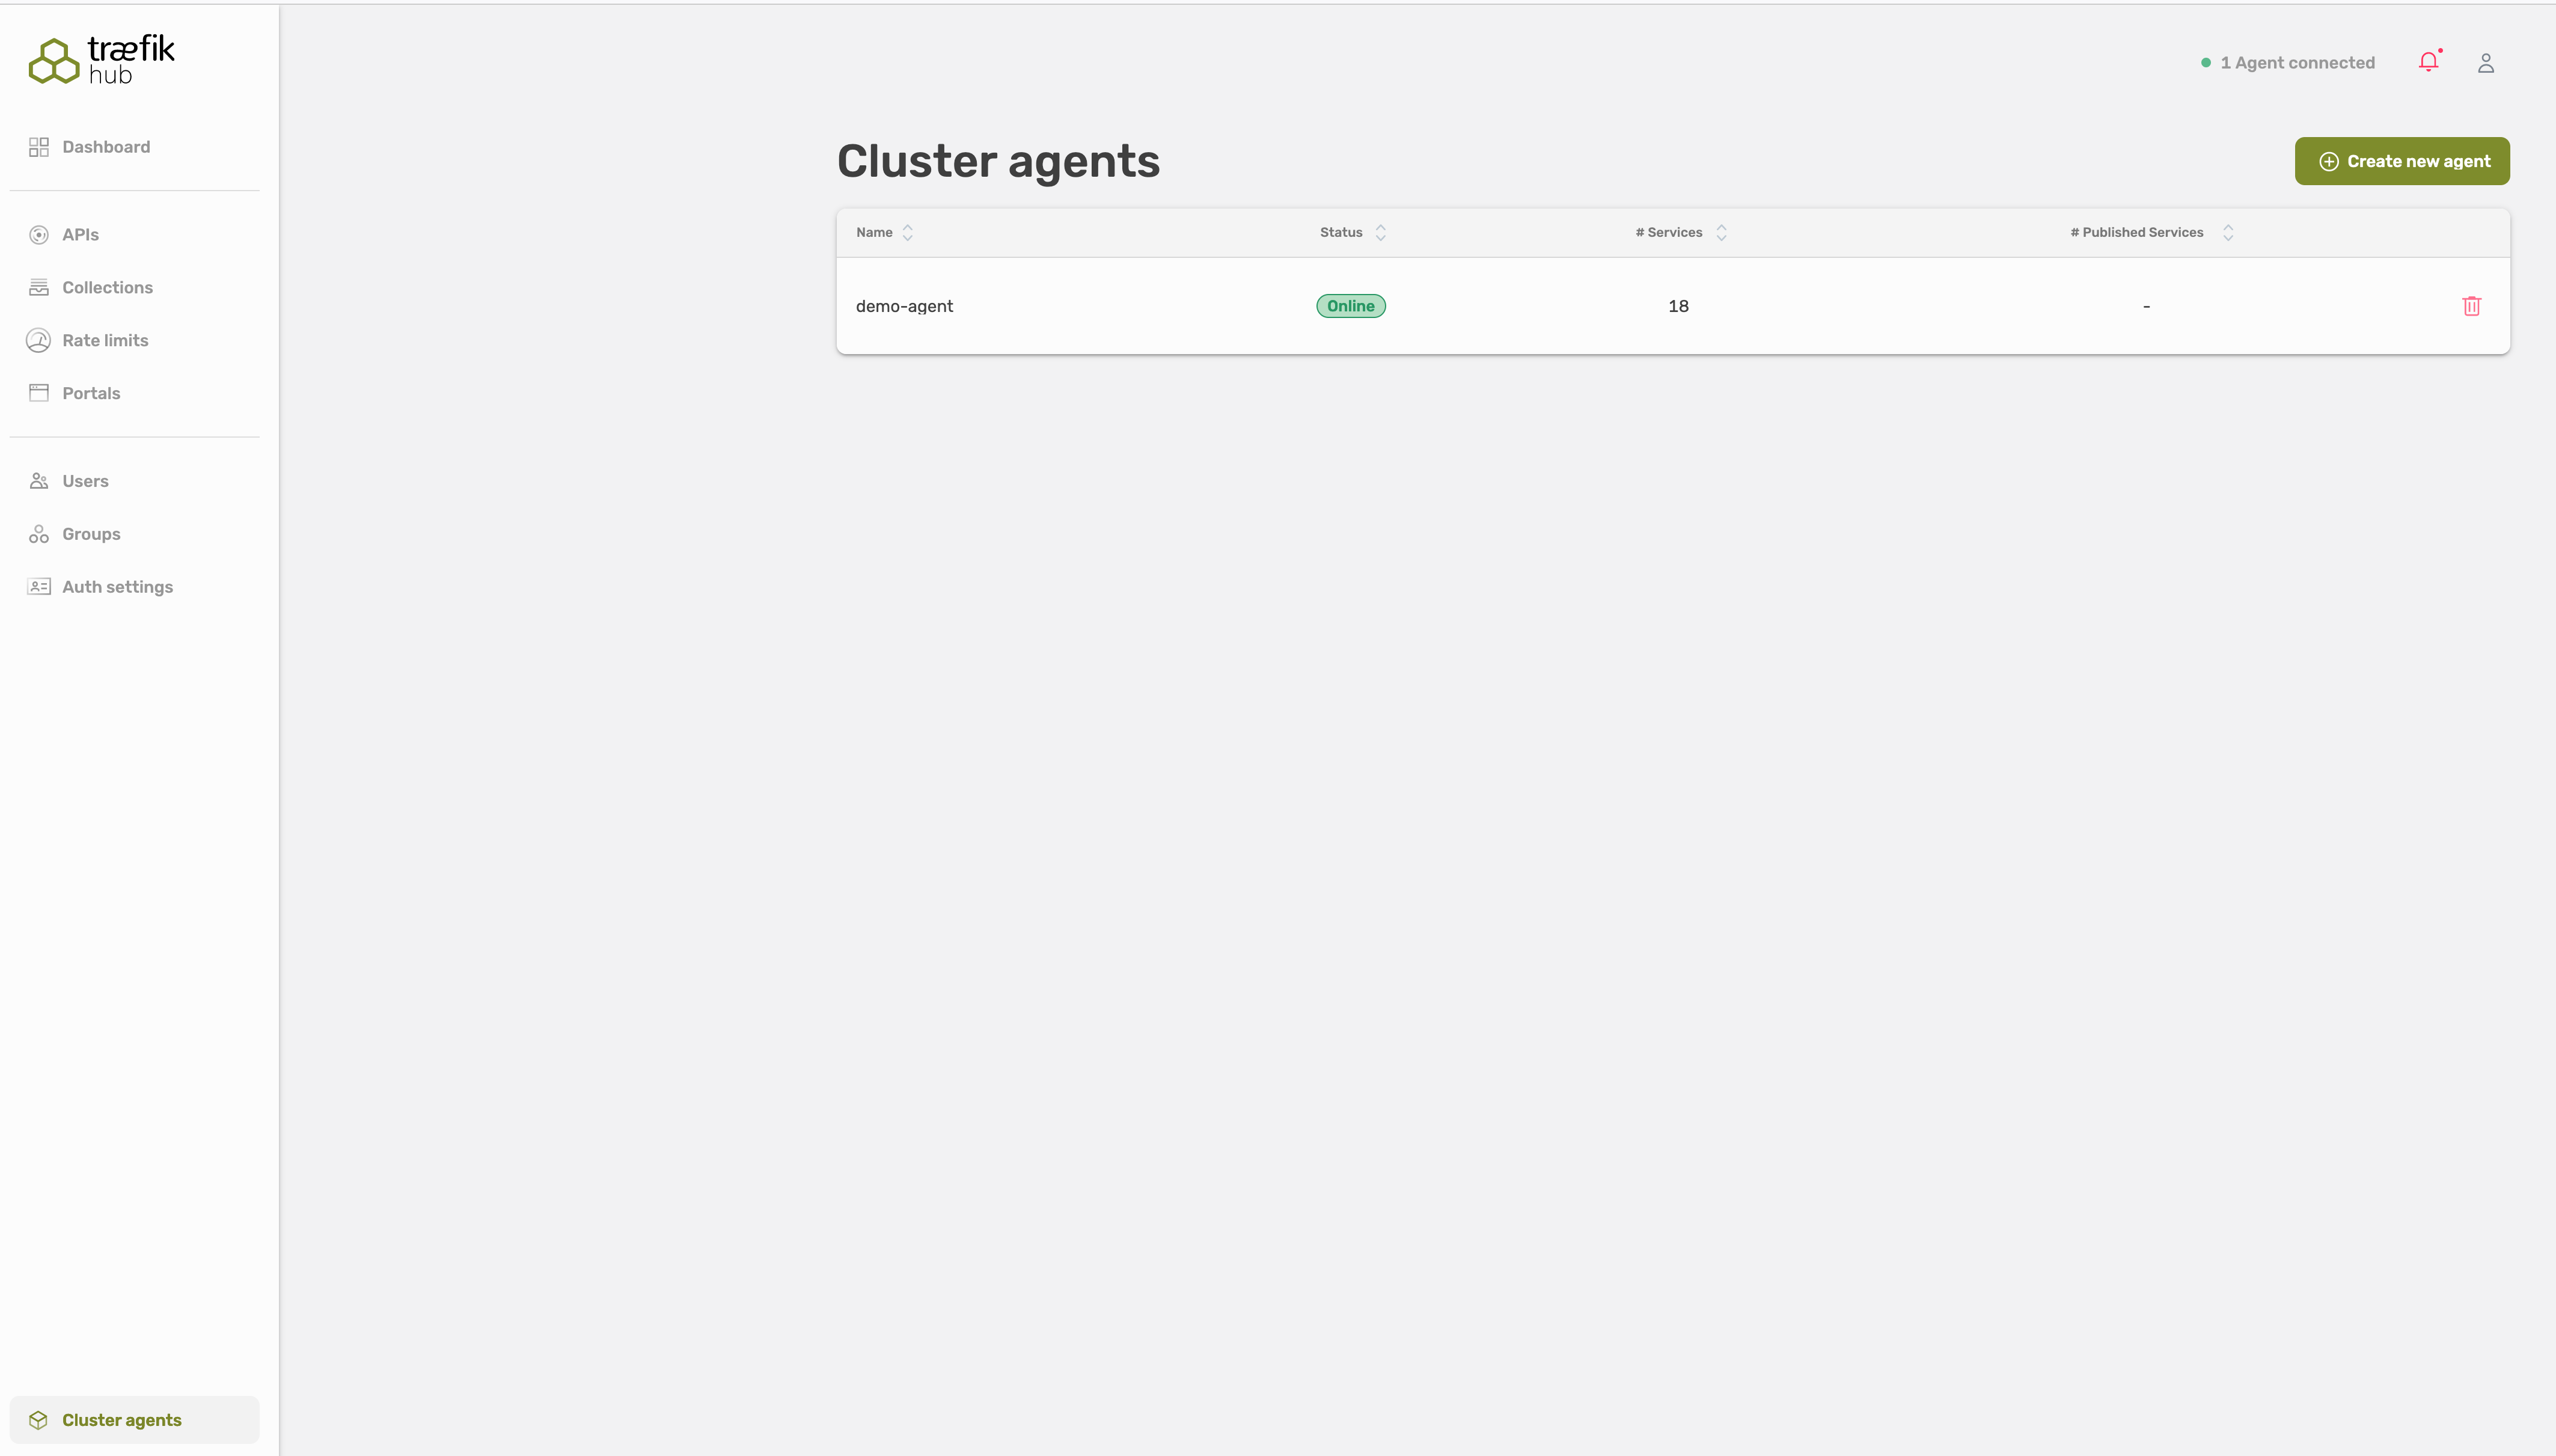 Create second cluster agent.